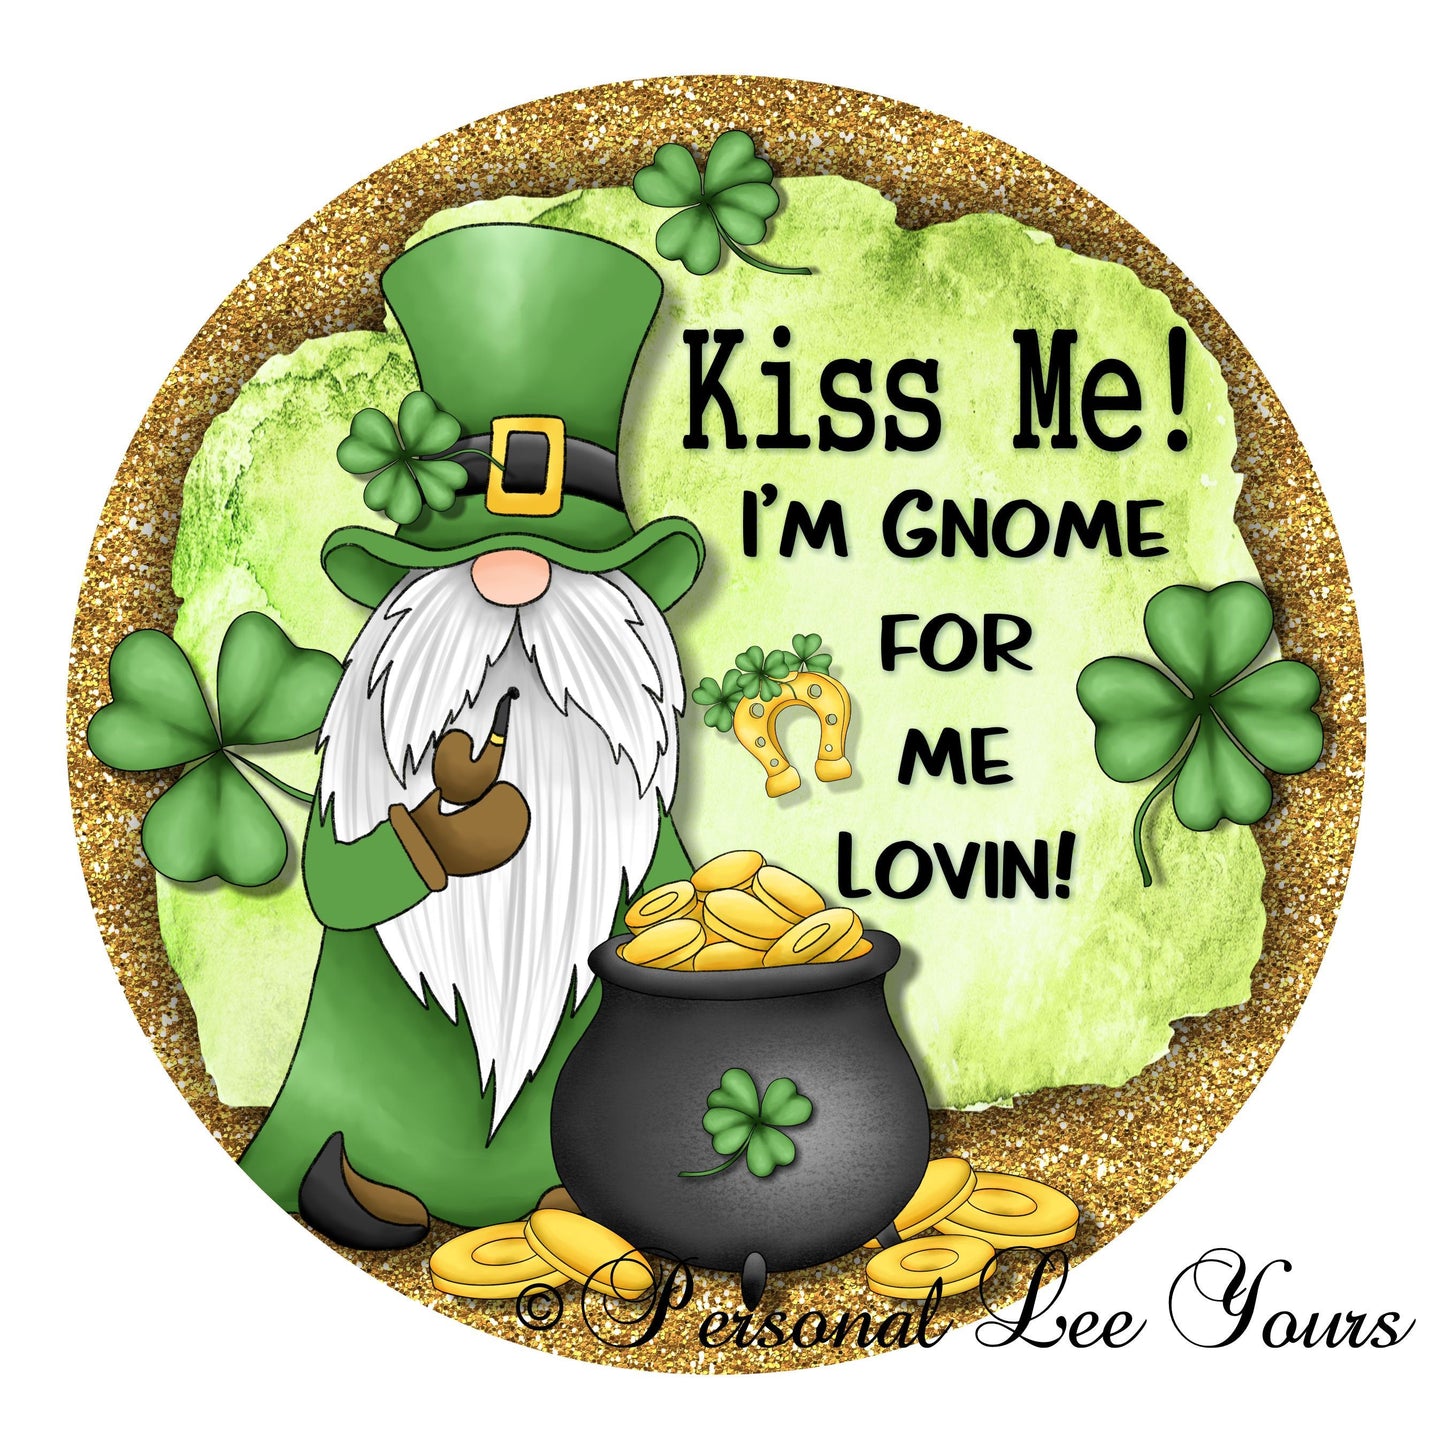 St. Patrick's Day Wreath Sign * Kiss Me!!  I'm Gnome For Me Lovin * Round * Lightweight Metal